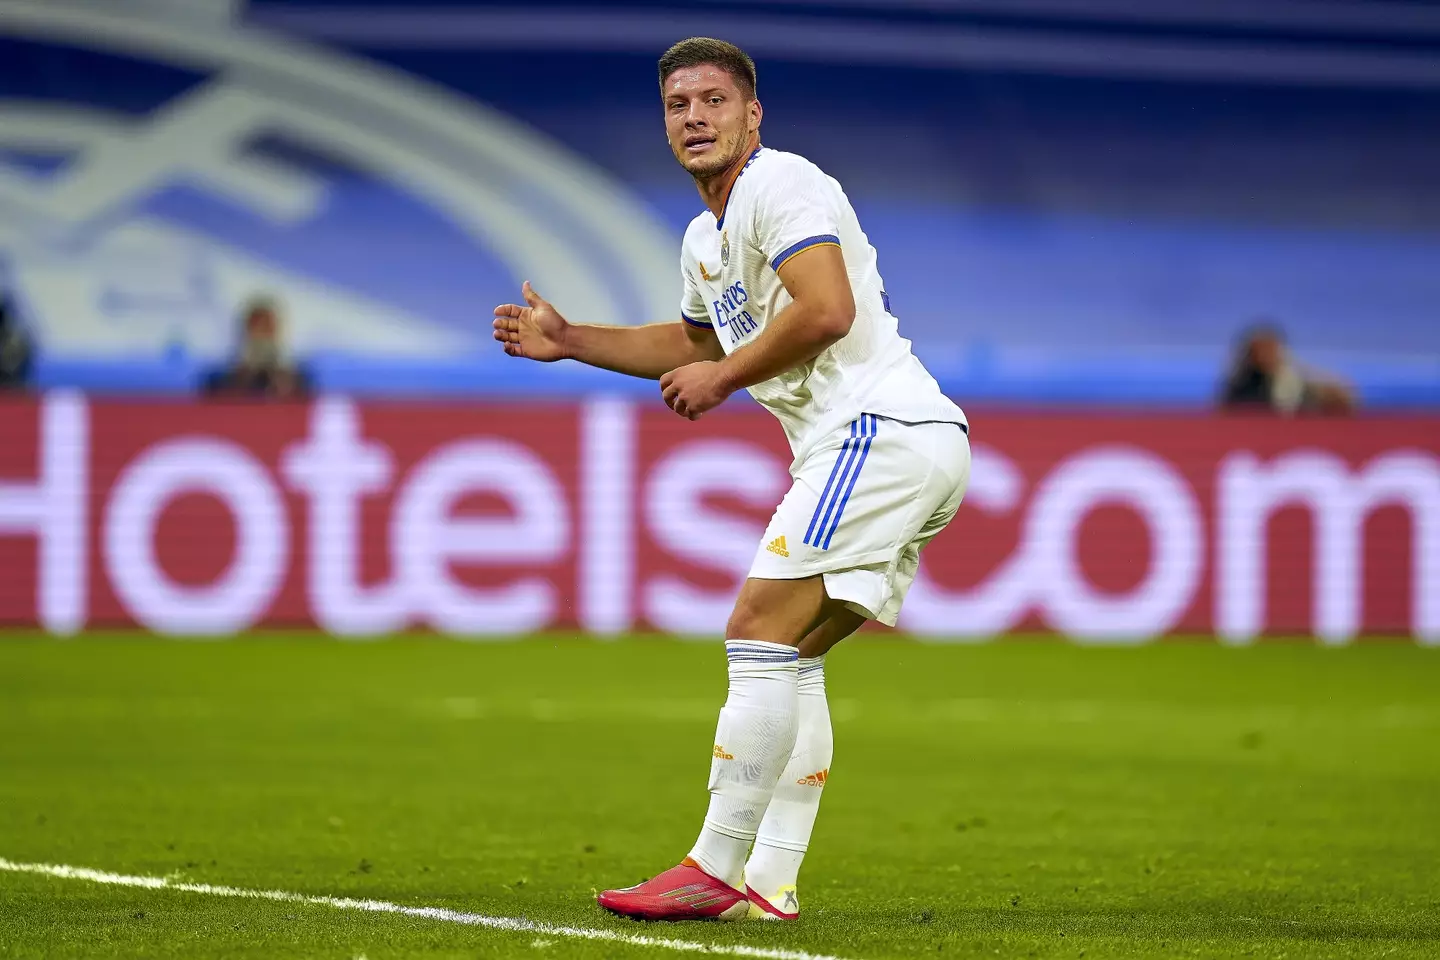 Jovic's move to Real Madrid hasn't worked out. Image: PA Images